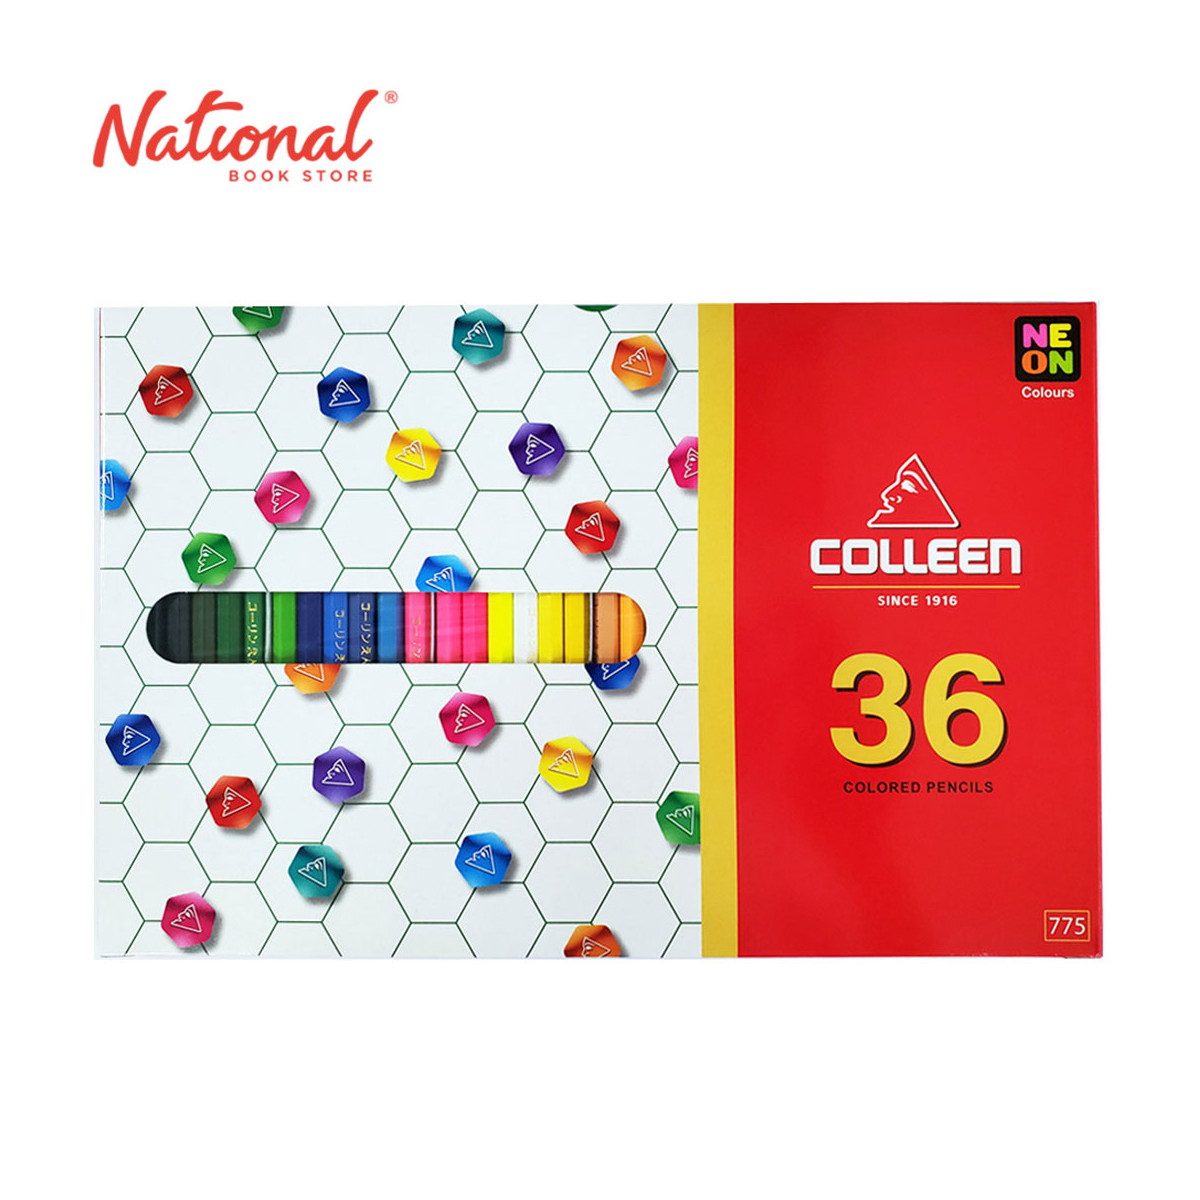 Colleen Colored Pencil 775 36 colors - Arts & Crafts Supplies